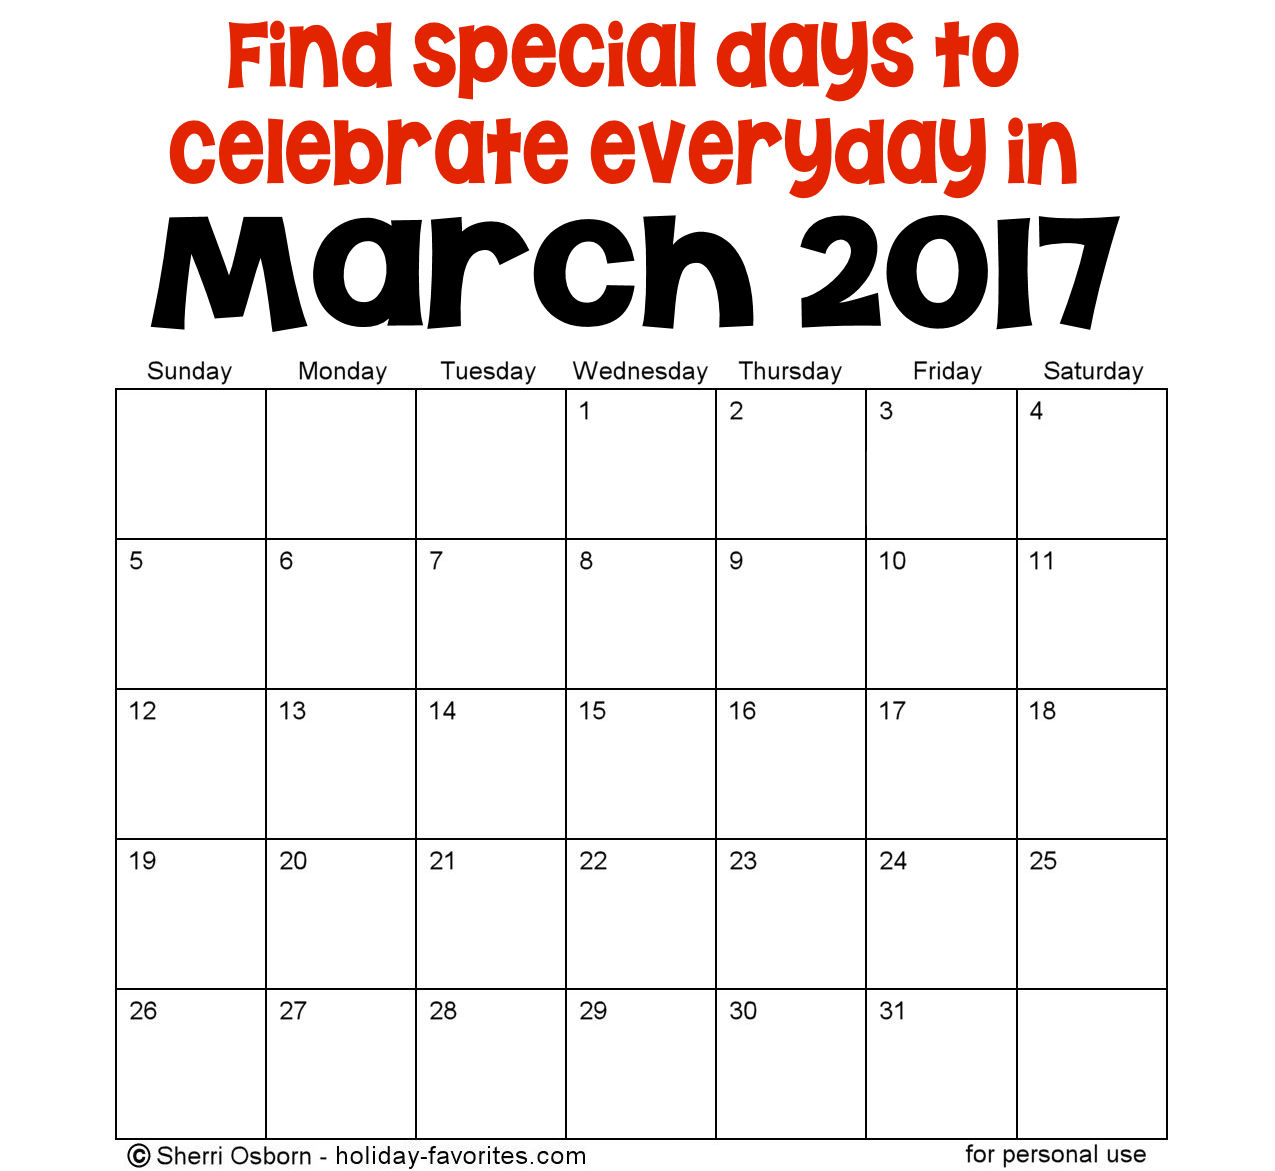 march-holidays-and-special-days-holiday-favorites